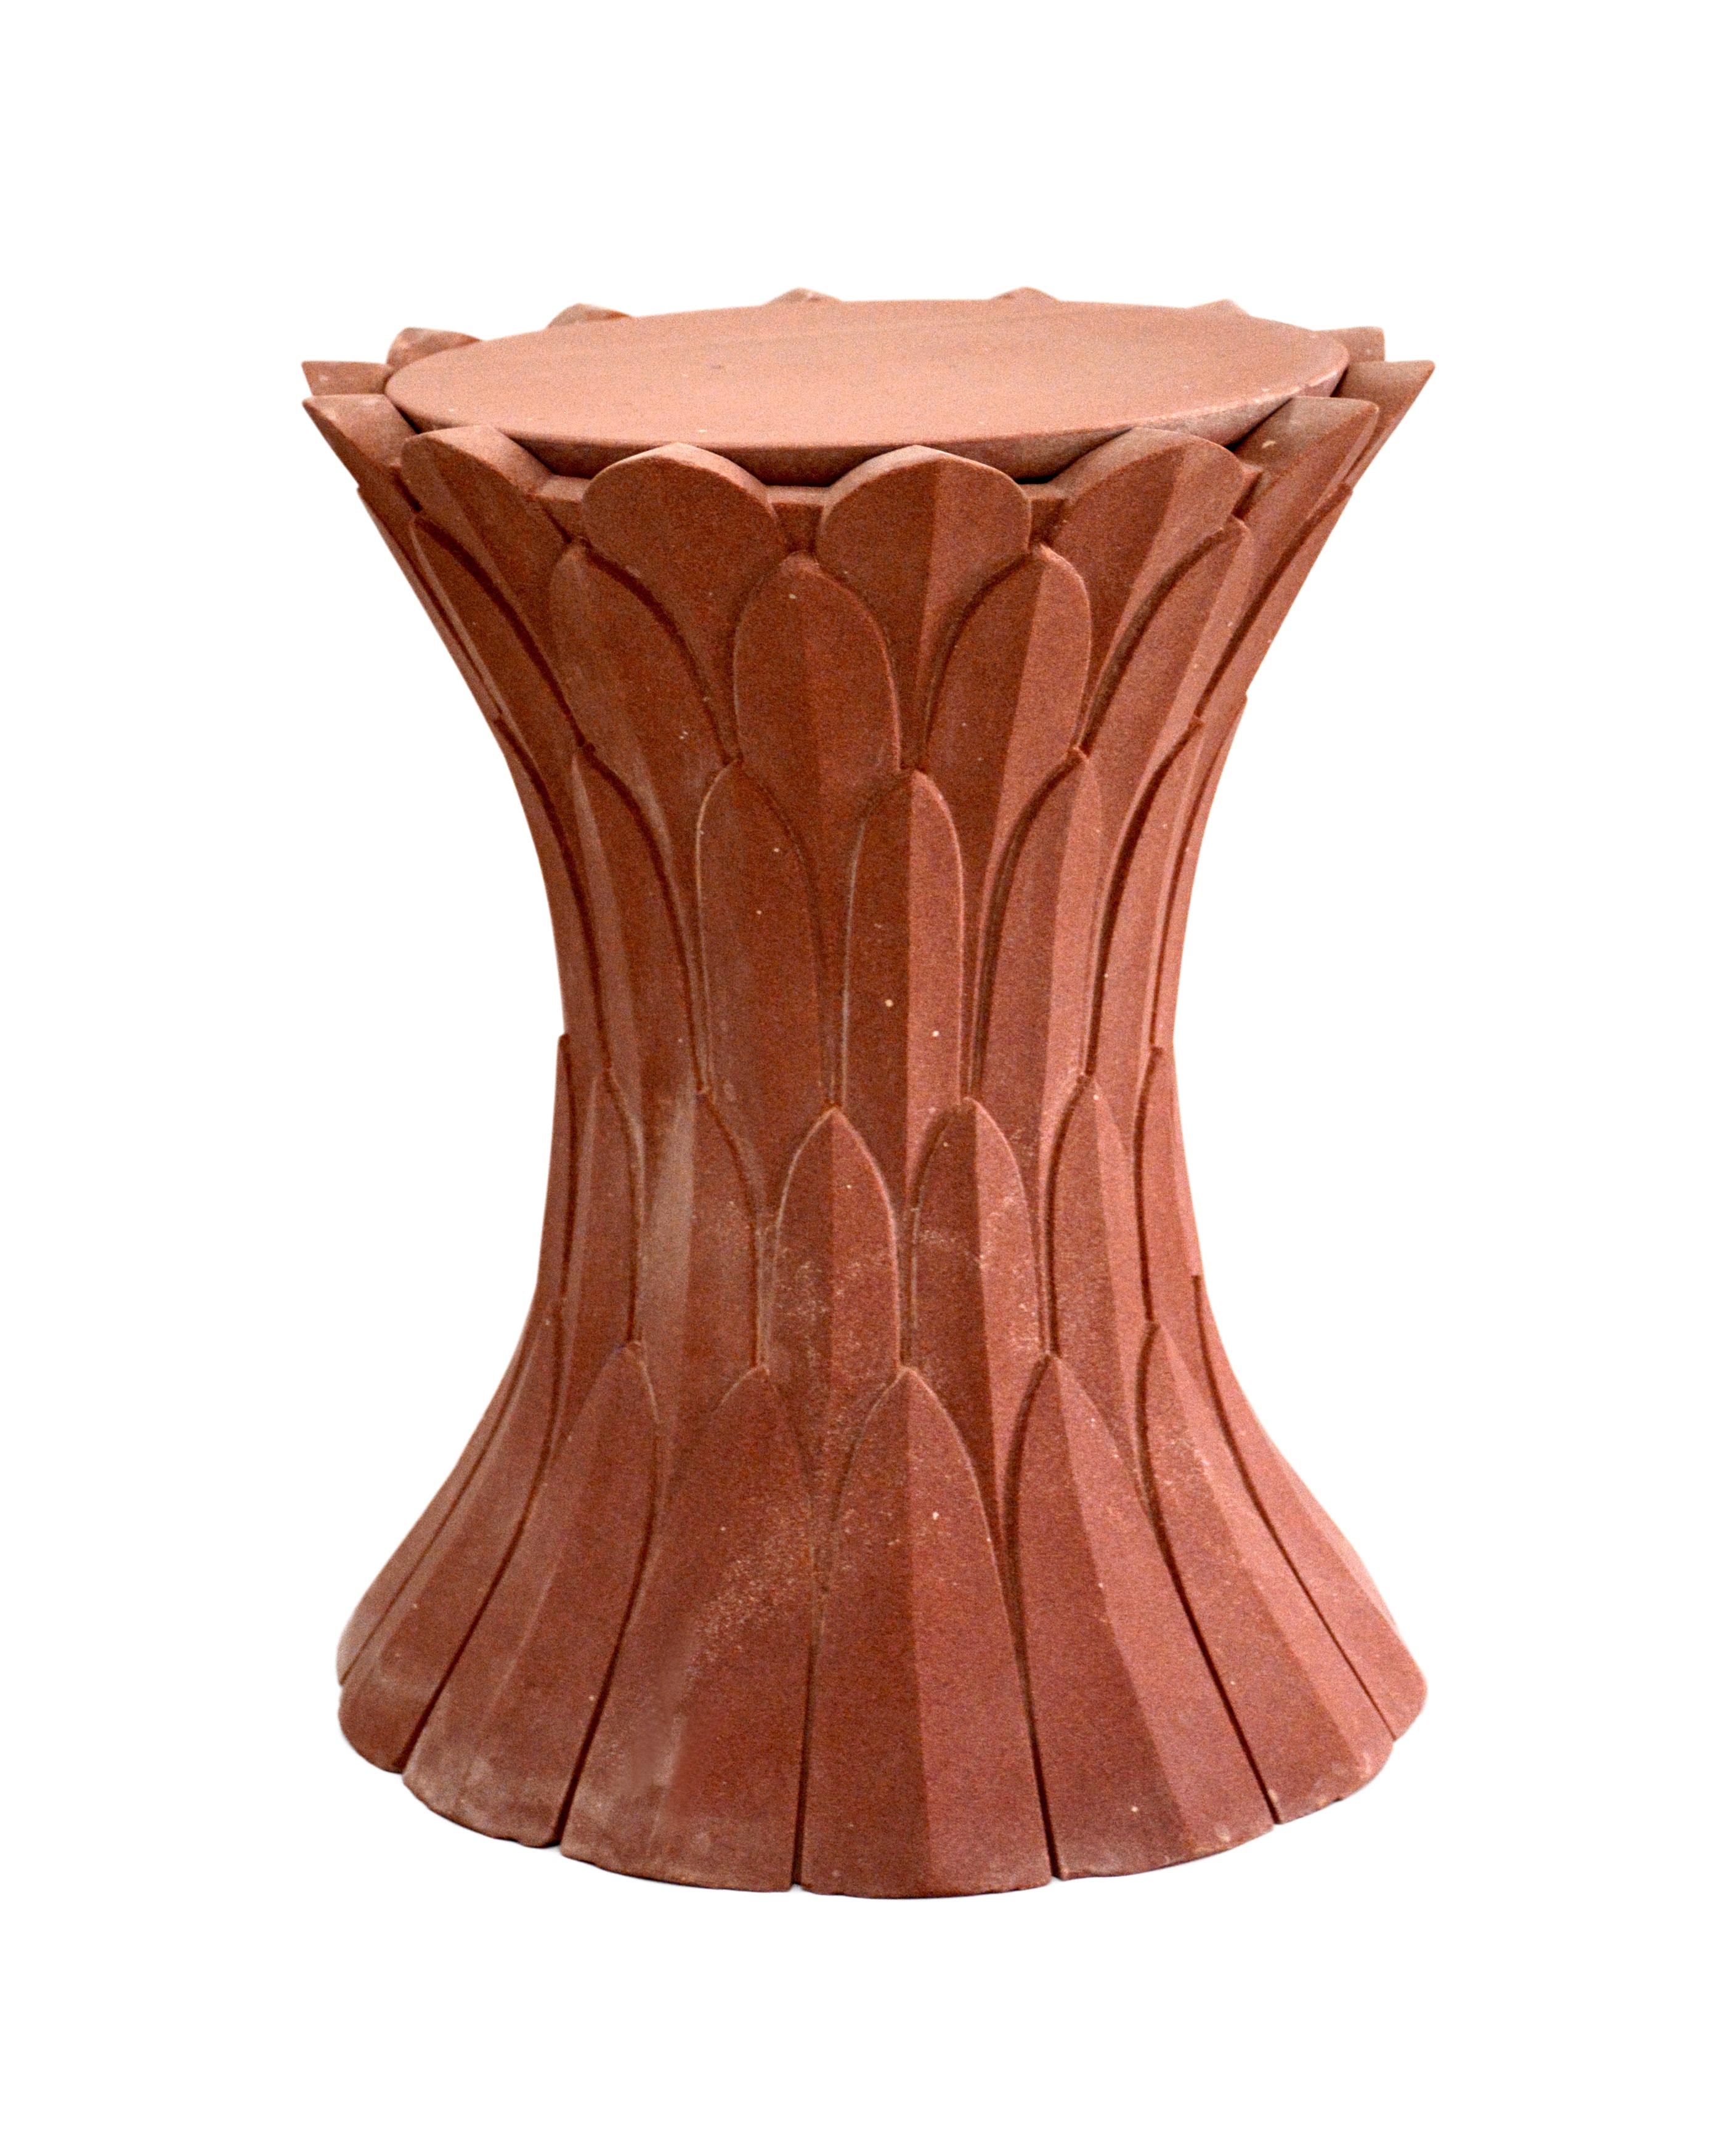 Contemporary Set of Two Feathers Side Tables in Agra Red Stone Handcrafted in India For Sale